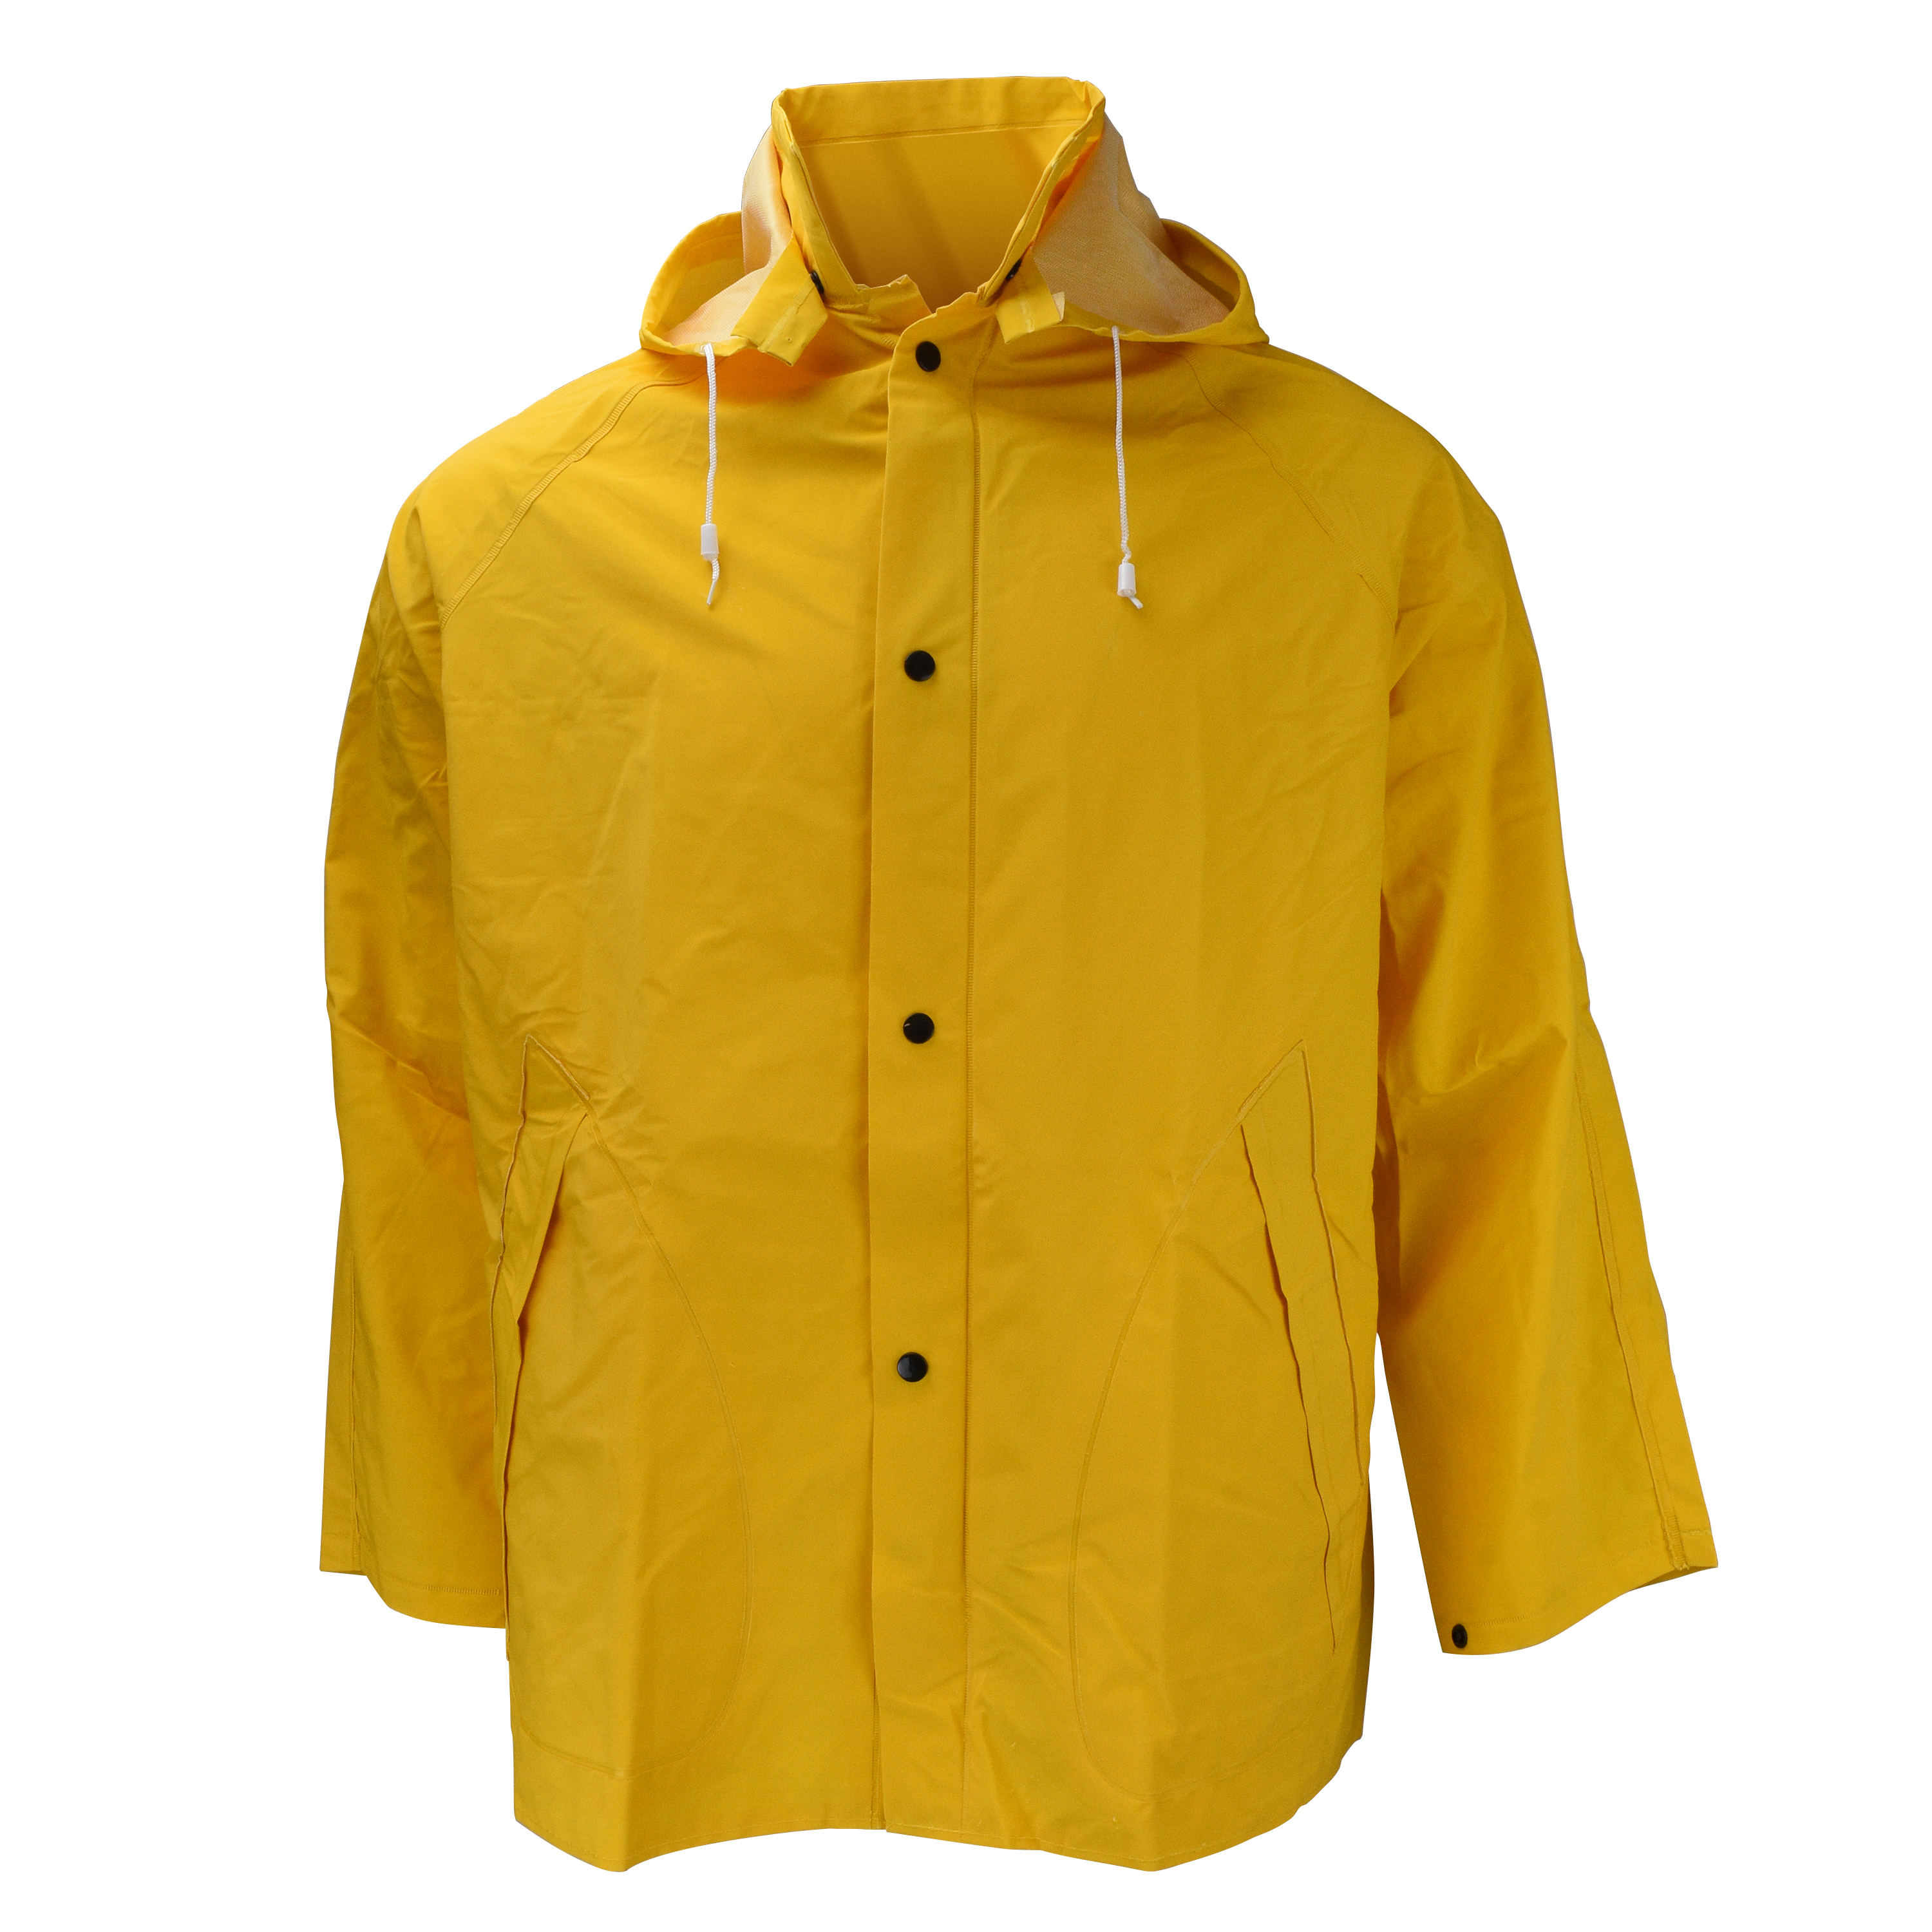 1600JH Economy Jacket with Snap-On Hood - Safety Yellow - Size 2X